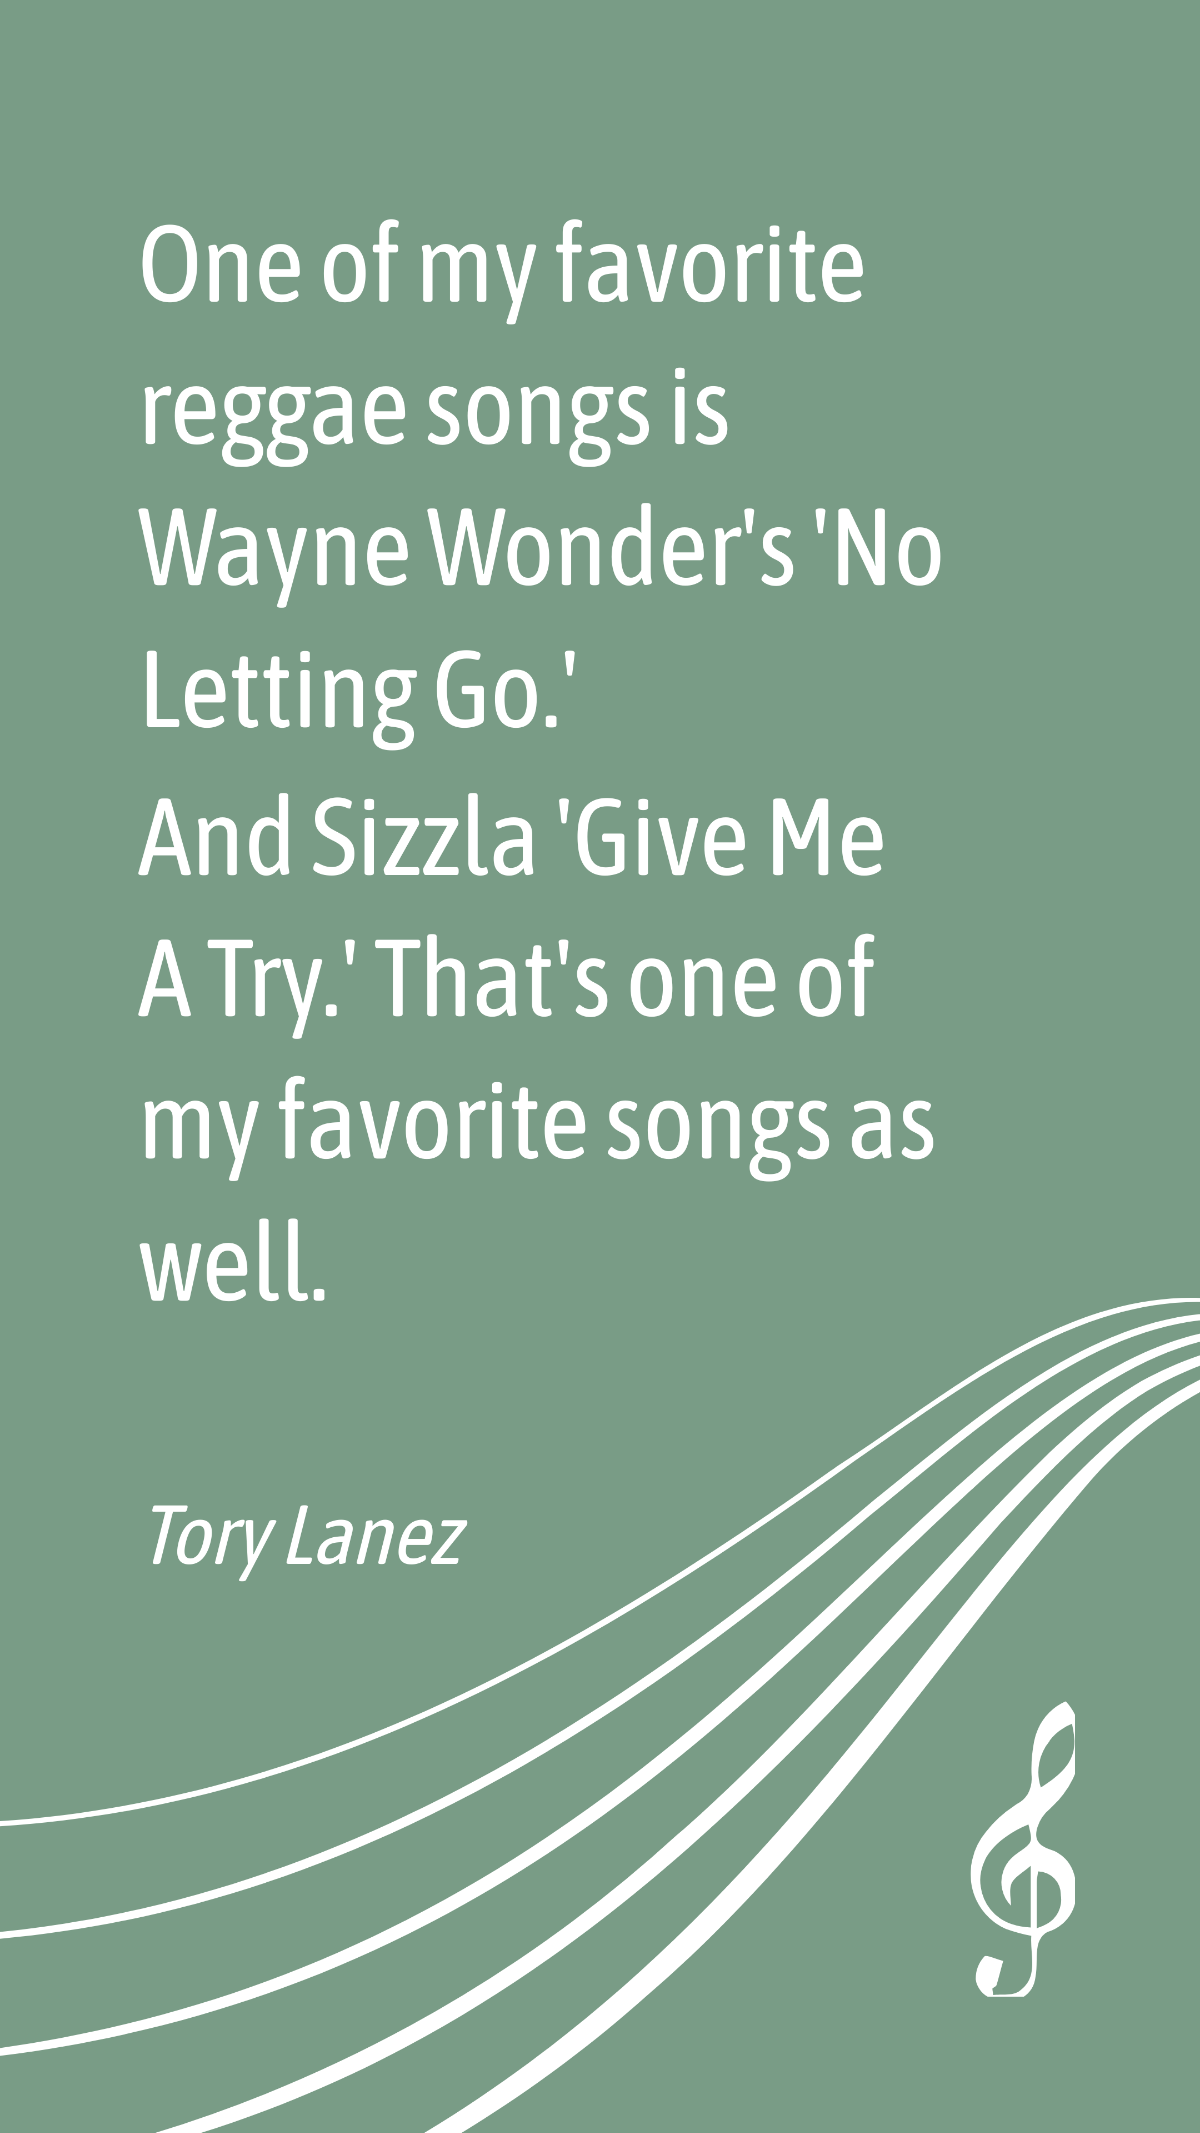 Tory Lanez - One of my favorite reggae songs is Wayne Wonder's 'No Letting Go.' And Sizzla 'Give Me A Try.' That's one of my favorite songs as well. Template